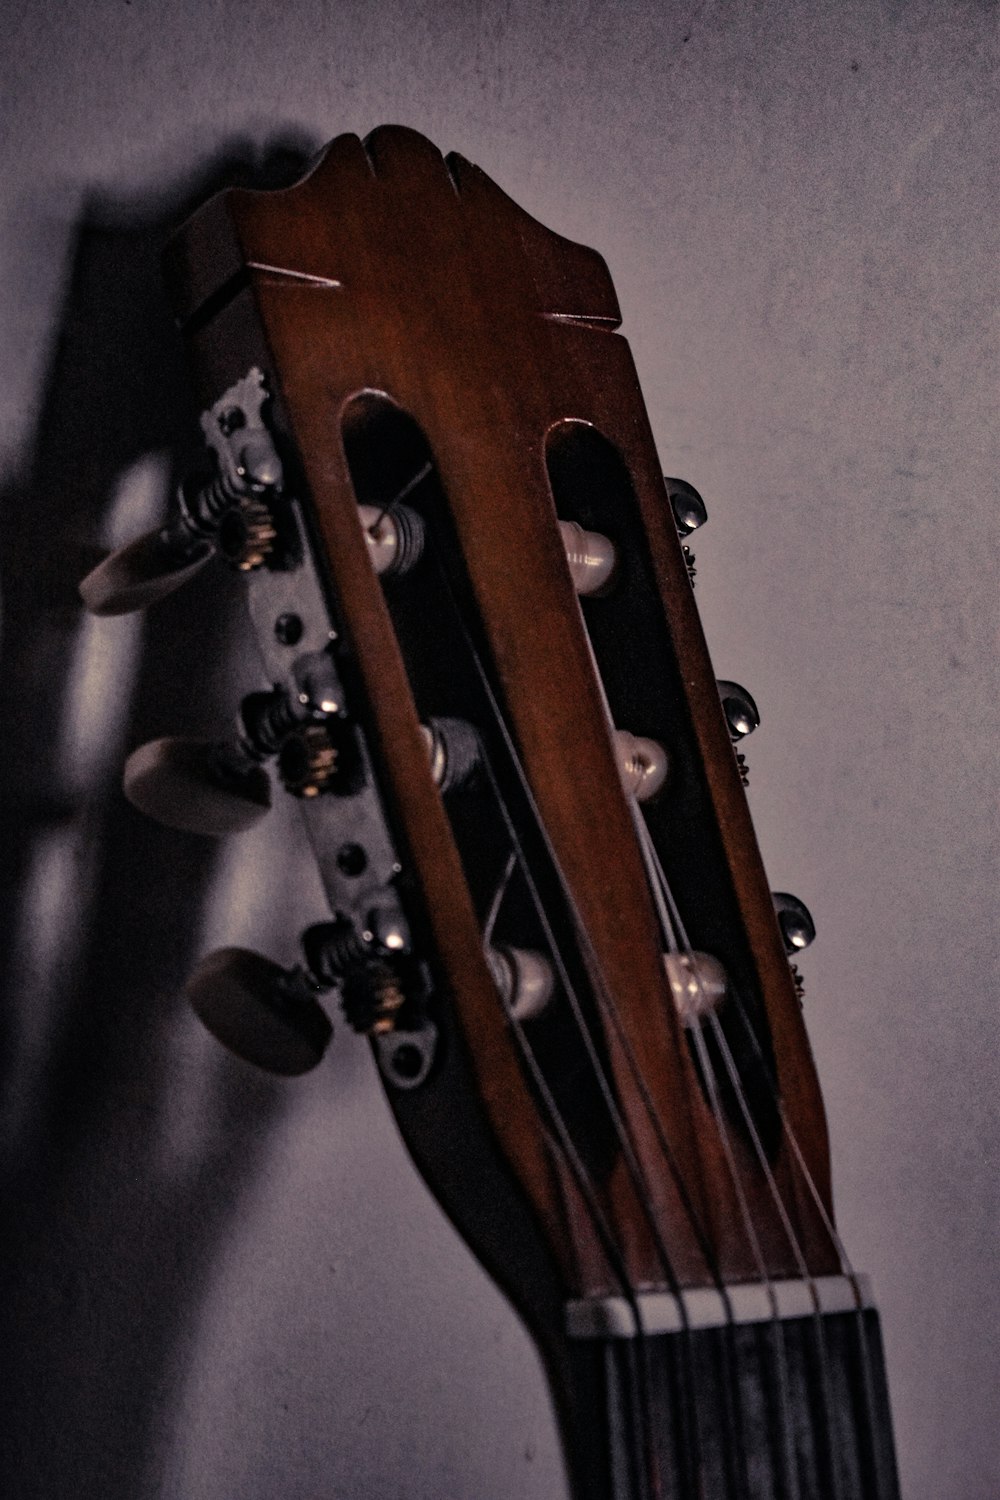 a close up of an acoustic guitar neck